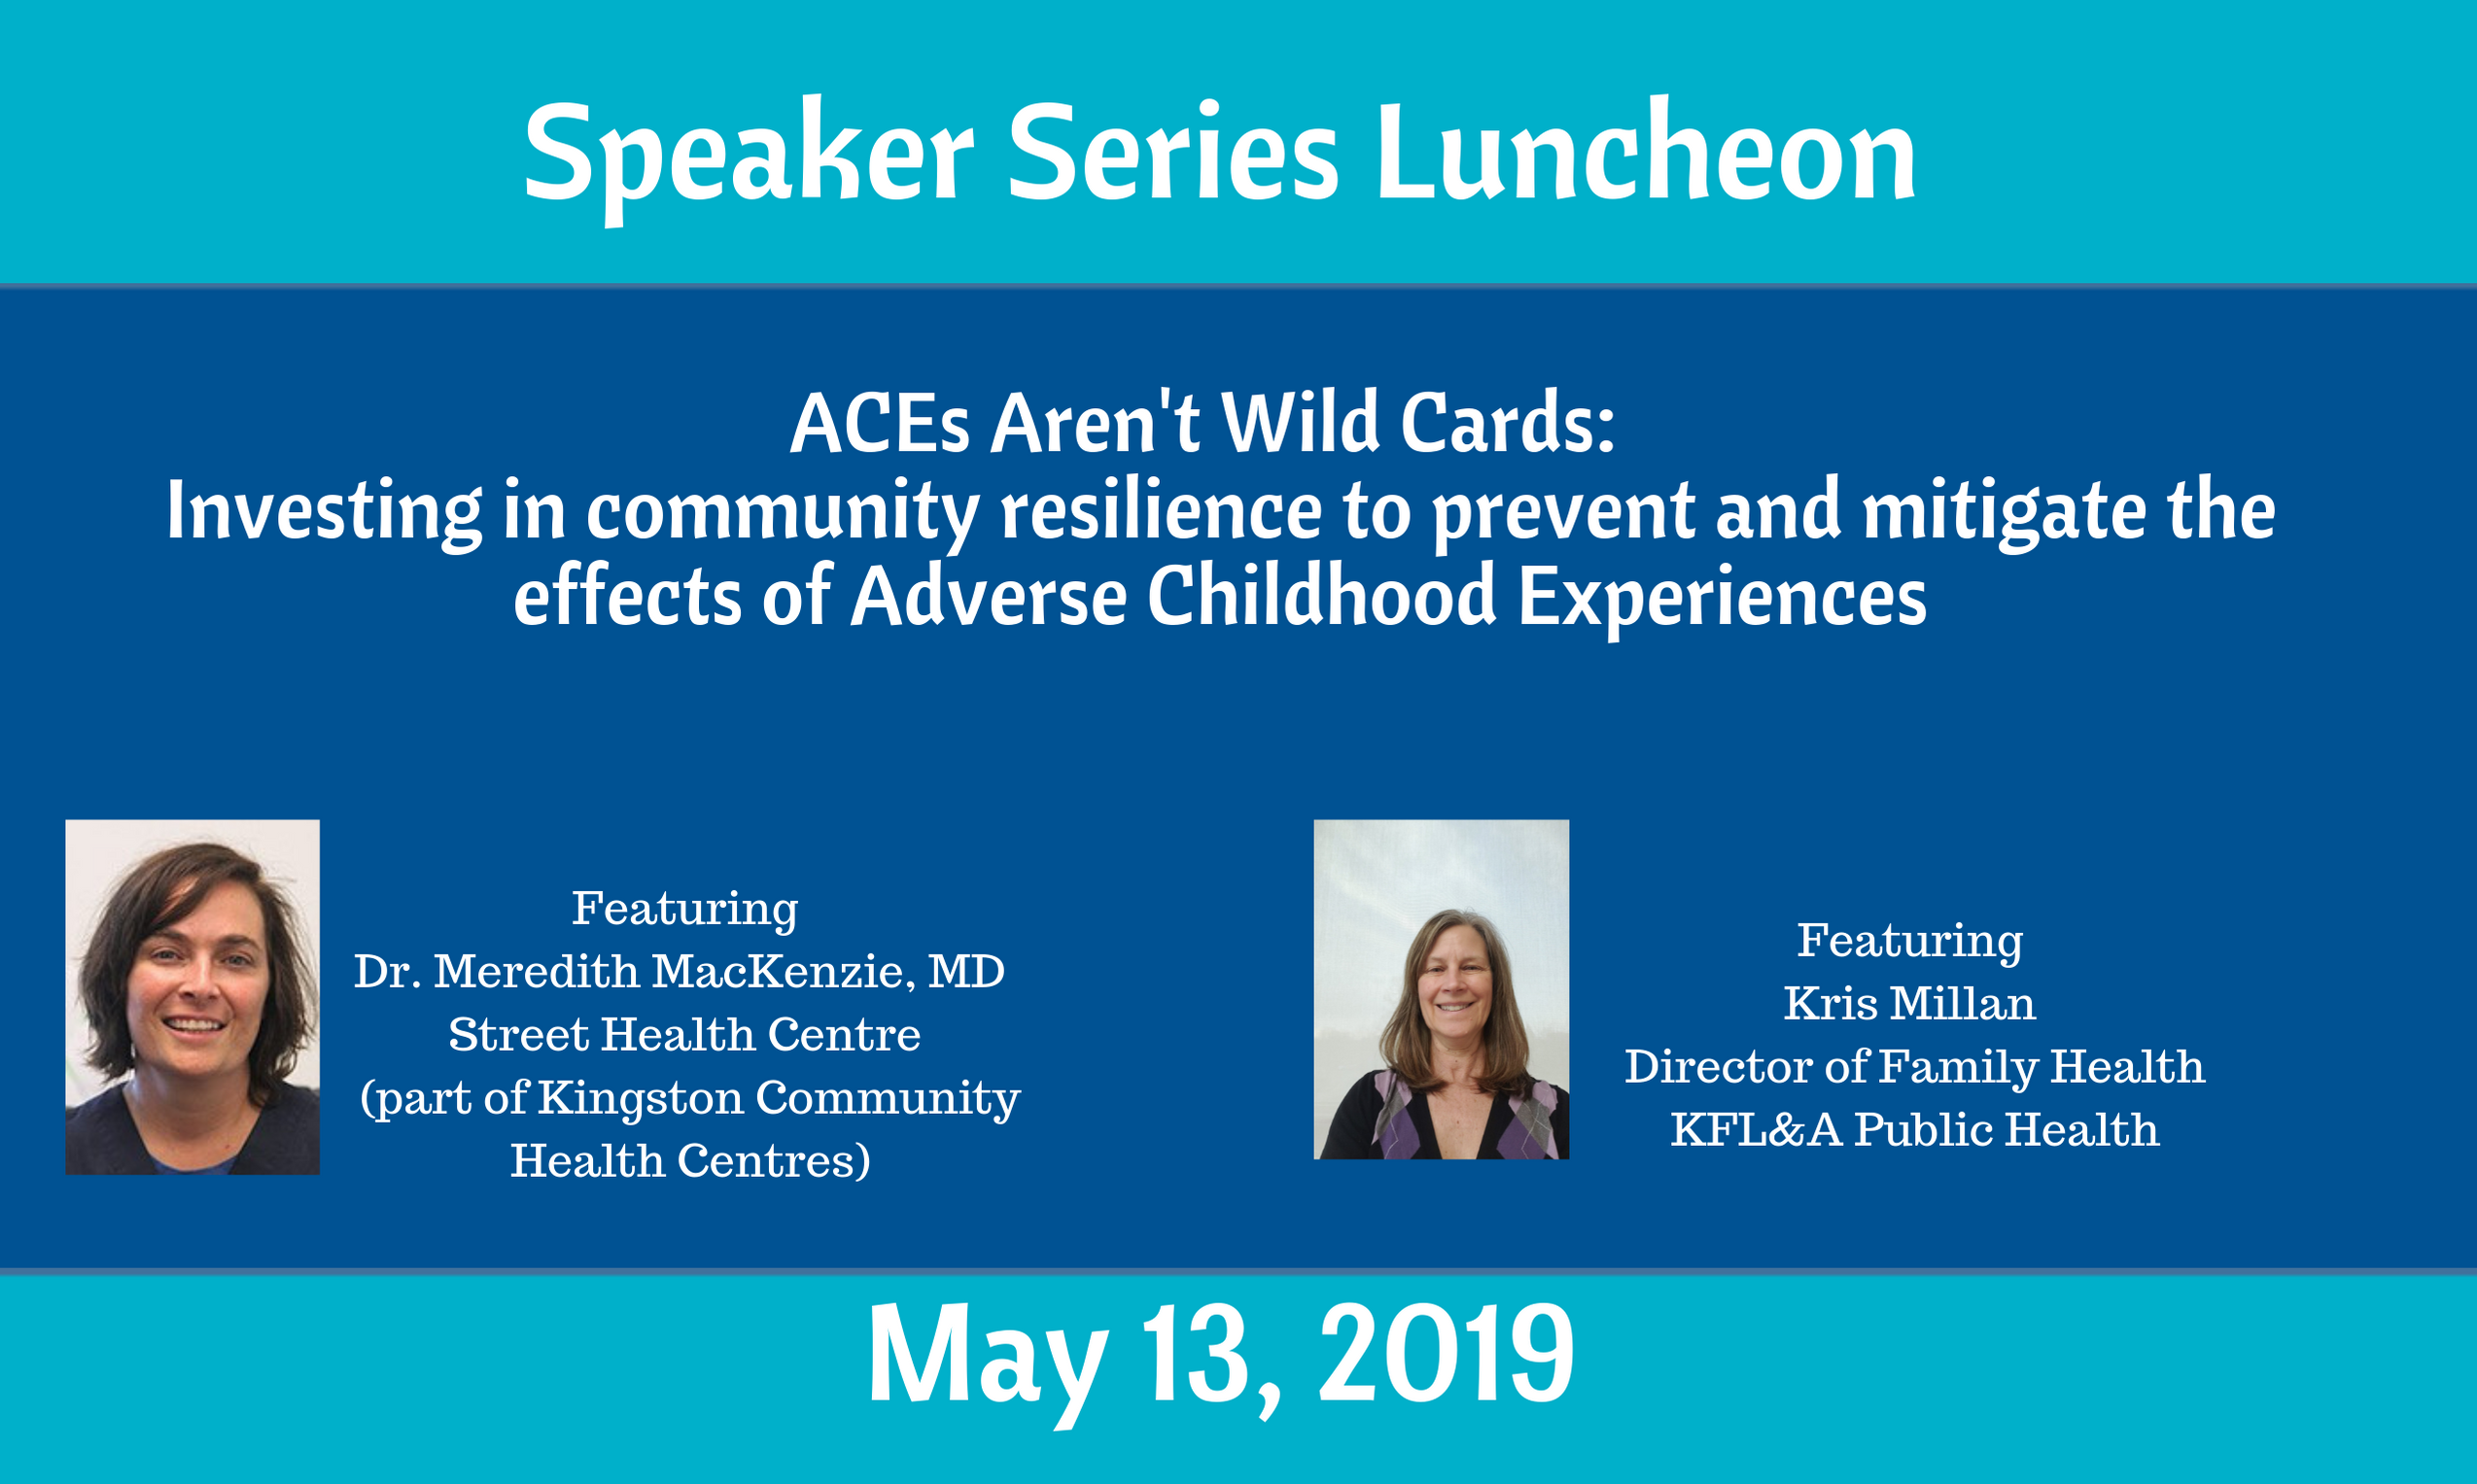 ACEs Aren’t Wild Cards: Investing in community resilience to prevent and mitigate the effects of Adverse Childhood Experiences